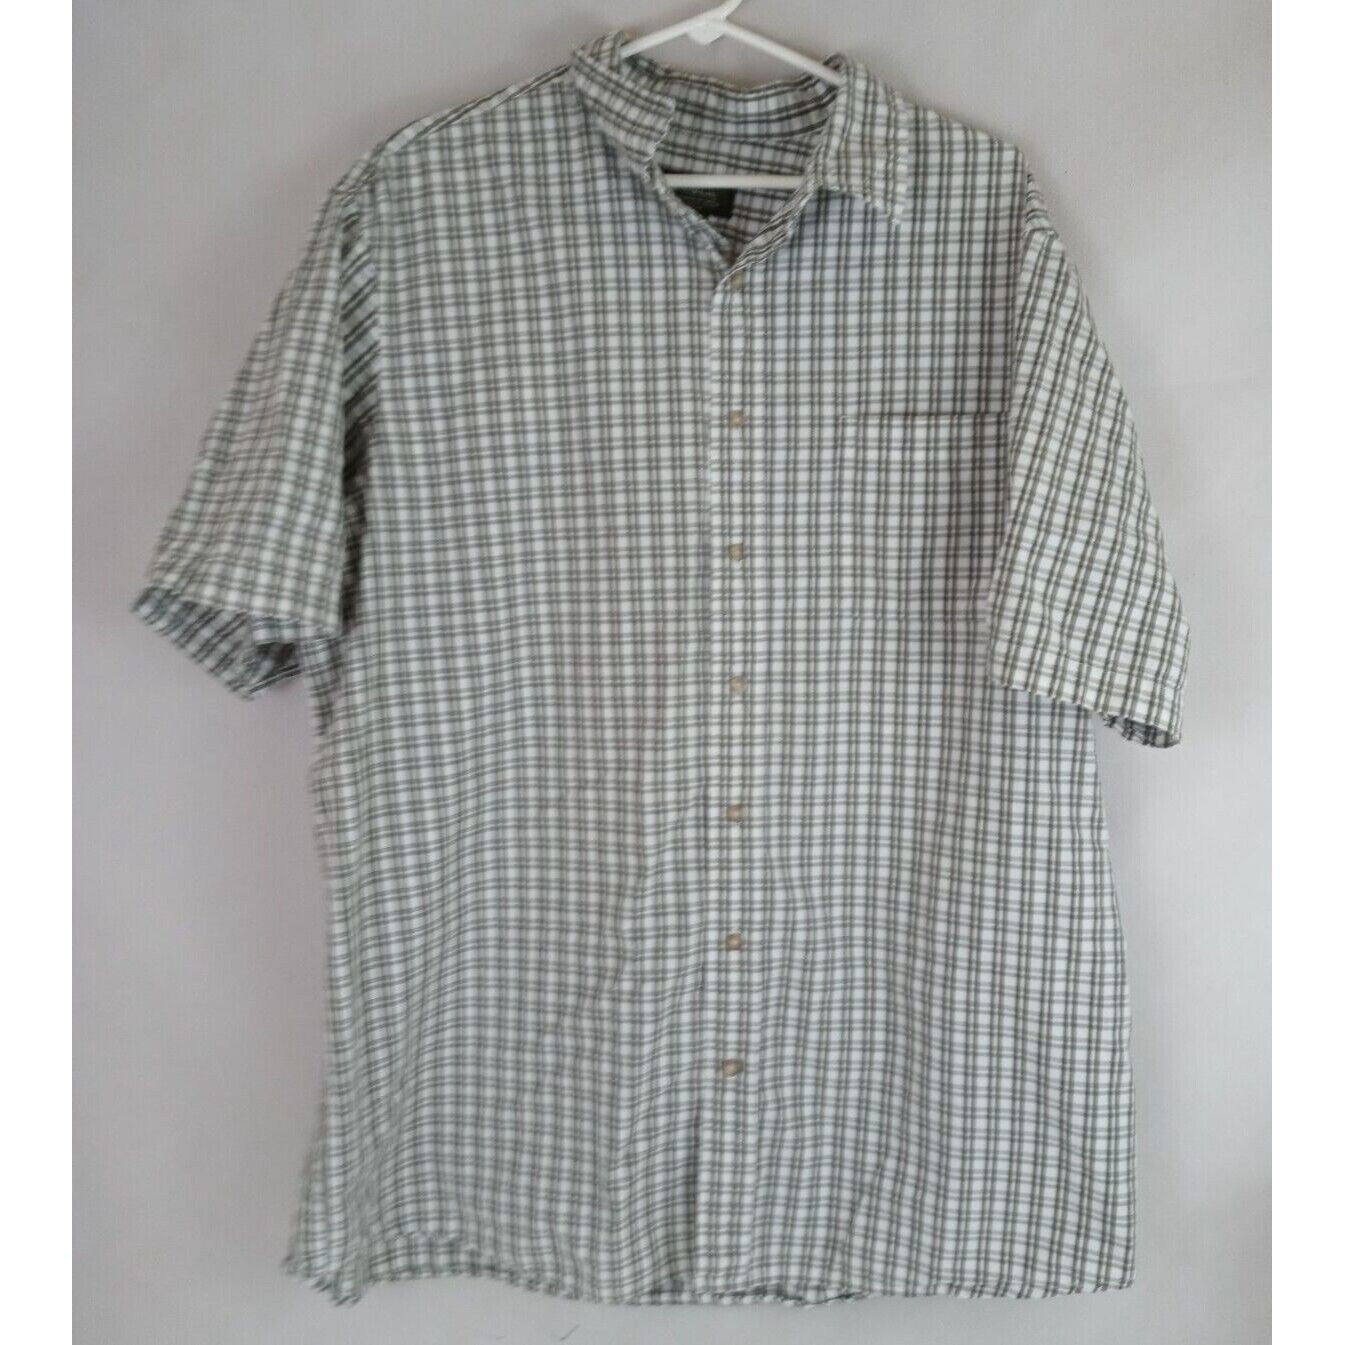 Primary image for Eddie Bauer Men's Green Checkered Short Sleeve Shirt Size XL Tall 100% Cotton